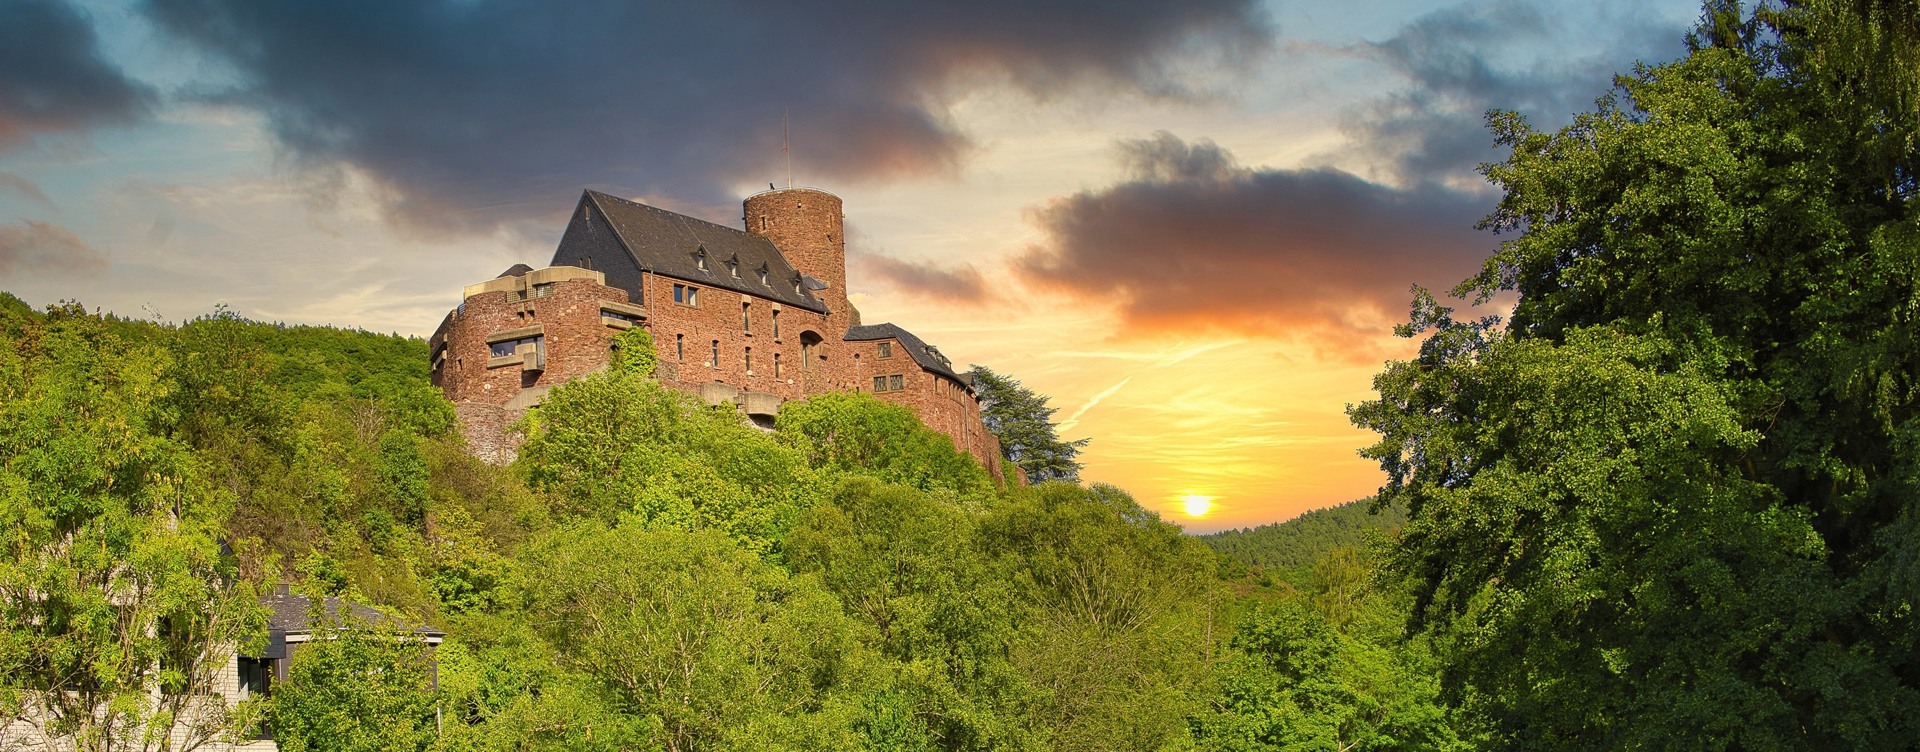 Visit picturesque Heimbach
during your holiday in the German Eifel